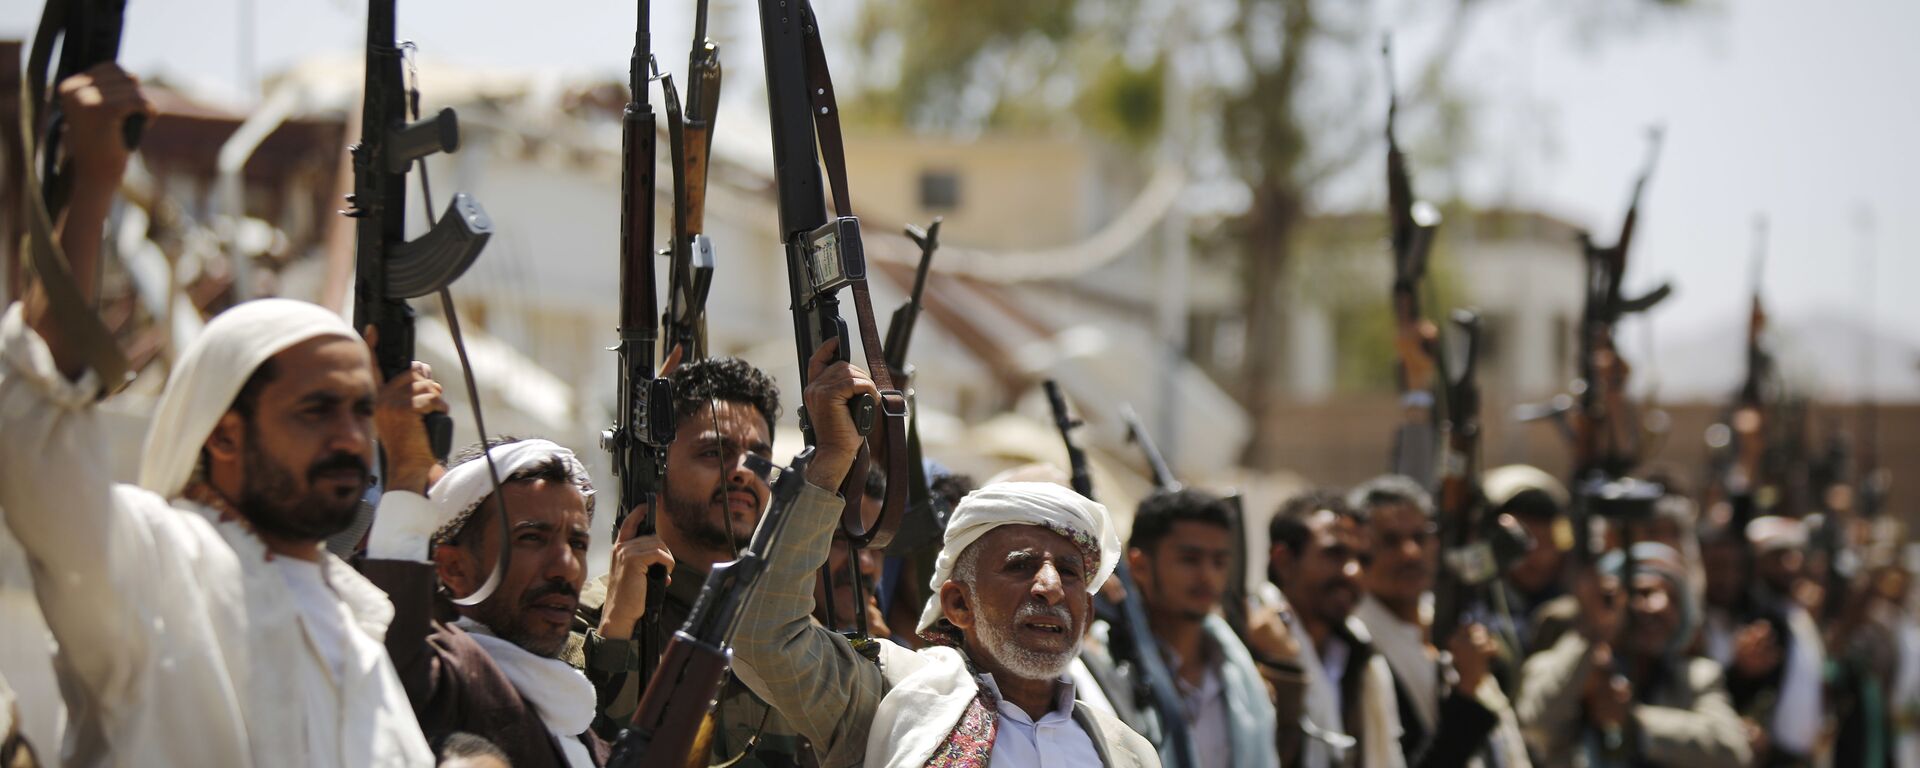 Shiite Houthi tribesmen hold their weapons as they chant slogans during a tribal gathering showing support for the Houthi movement, in Sanaa, Yemen, Thursday, May 19, 2016 - Sputnik International, 1920, 21.12.2023